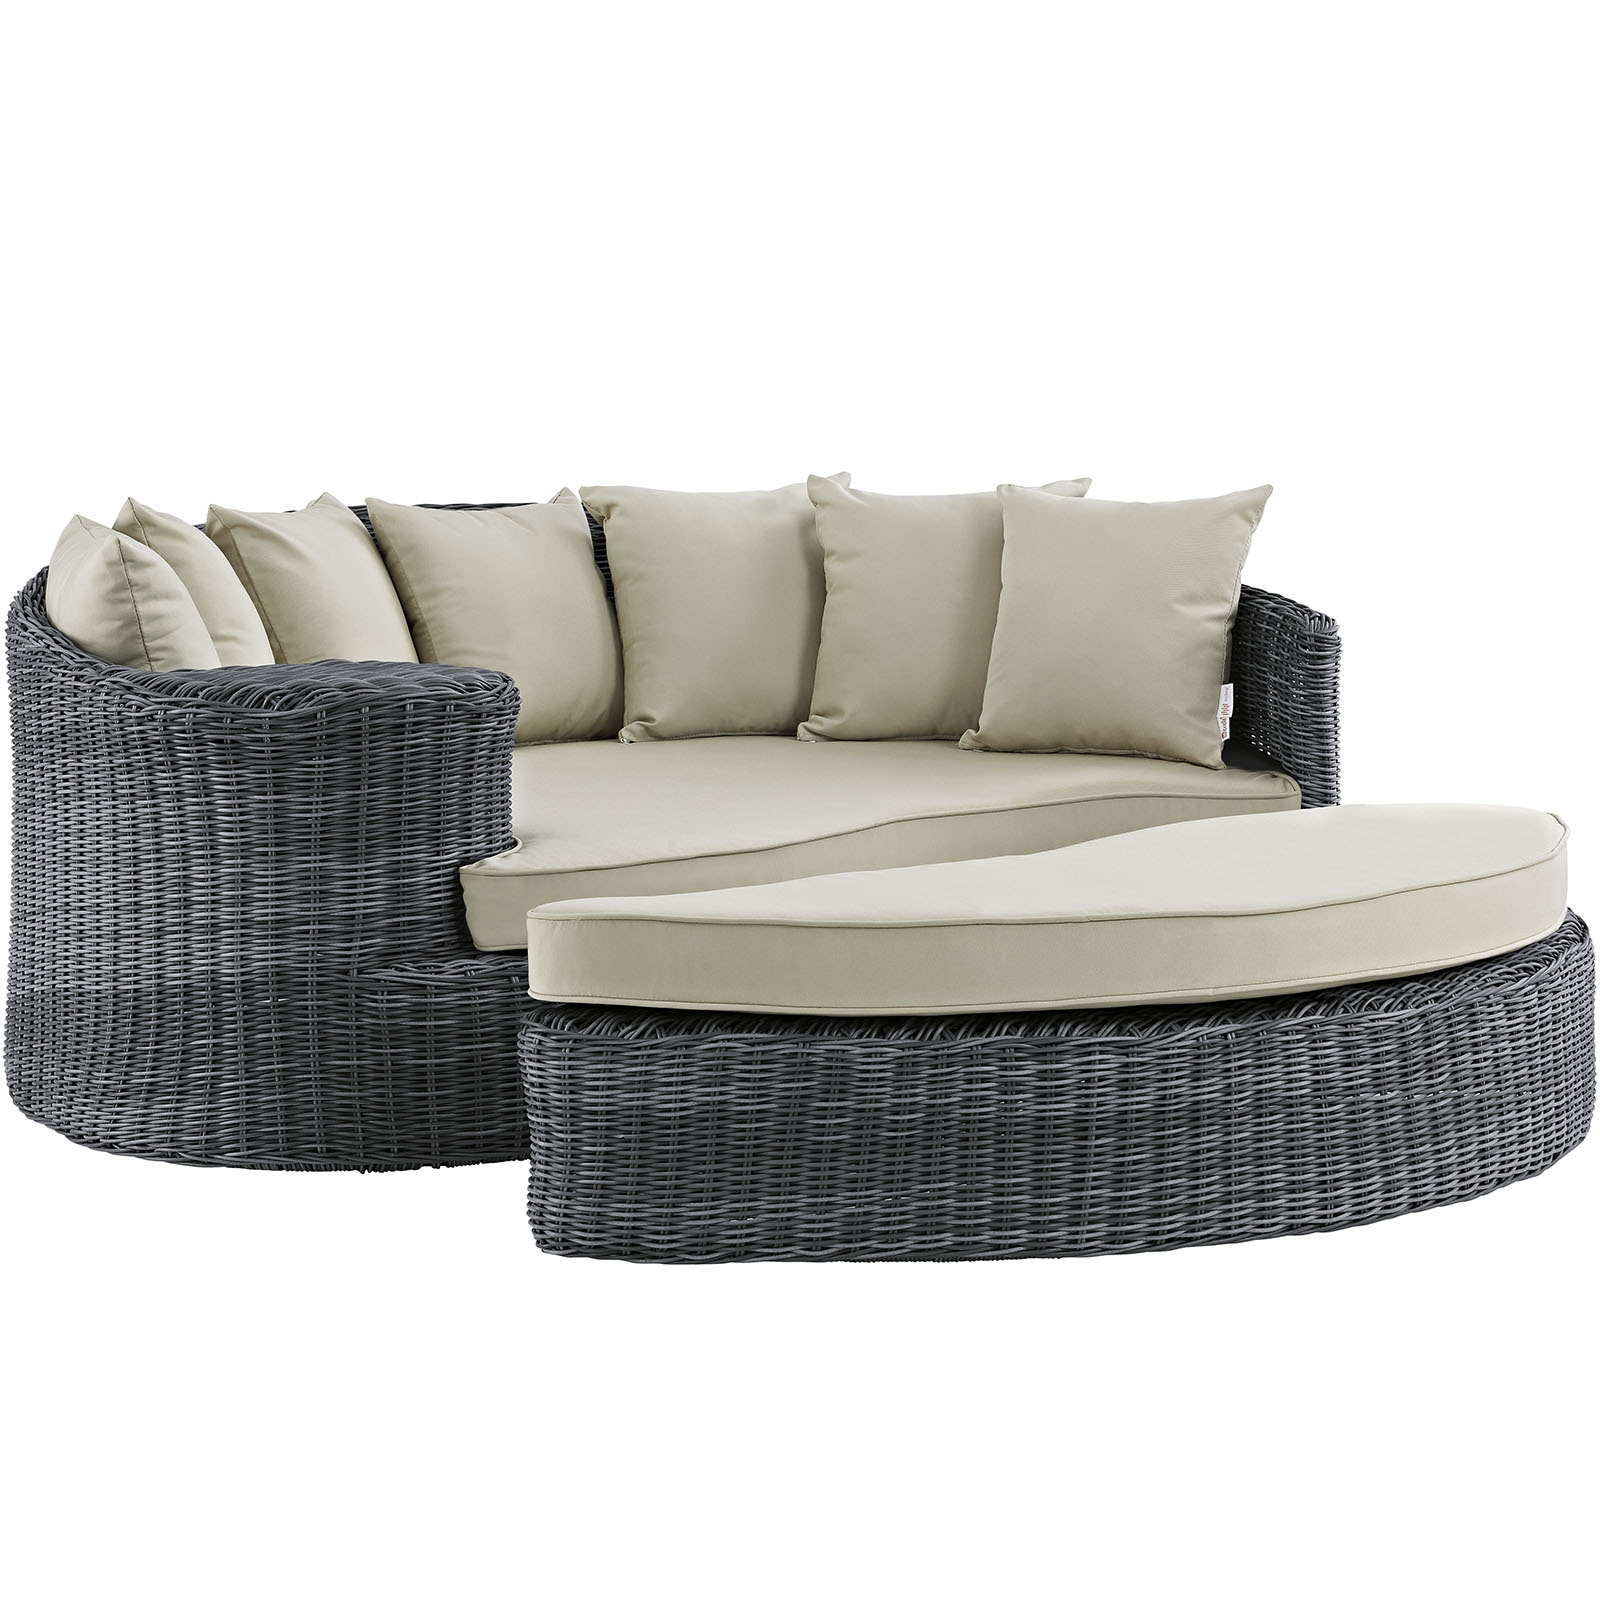 Modern Contemporary Urban Design Outdoor Patio Balcony Daybed Sofa, Beige, Rattan - image 1 of 4